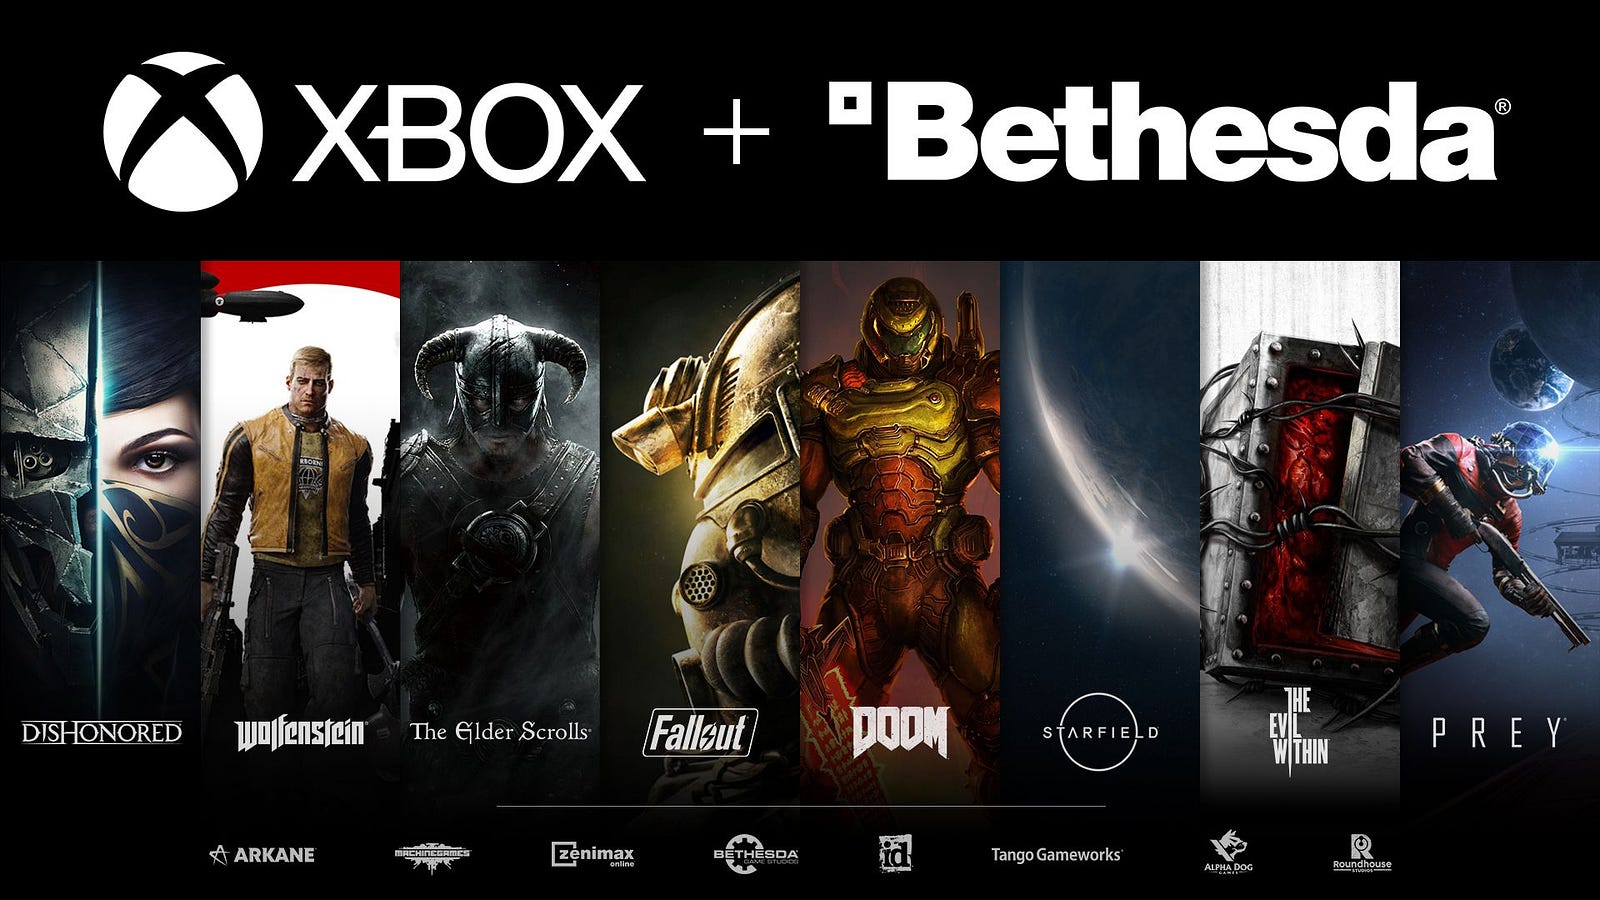 Image announcing the partnership between Xbox and Bethesda. White text at the top reads “Xbox + Bethesda.” Beneath the text, there are eight images of characters from famous Bethesda game franchises. From left to right: Dishonored, Wolfenstein, The Elder Scrolls, Fallout, Doom, Starfield, The Evil Within, and Prey. Below are logos for eight studios. From left to right: Arkane, Machine Games, Zenimax, Bethesda Game Studios, Id Software, Tango Gameworks, Alpha Dog Games, Roundhouse Studios.